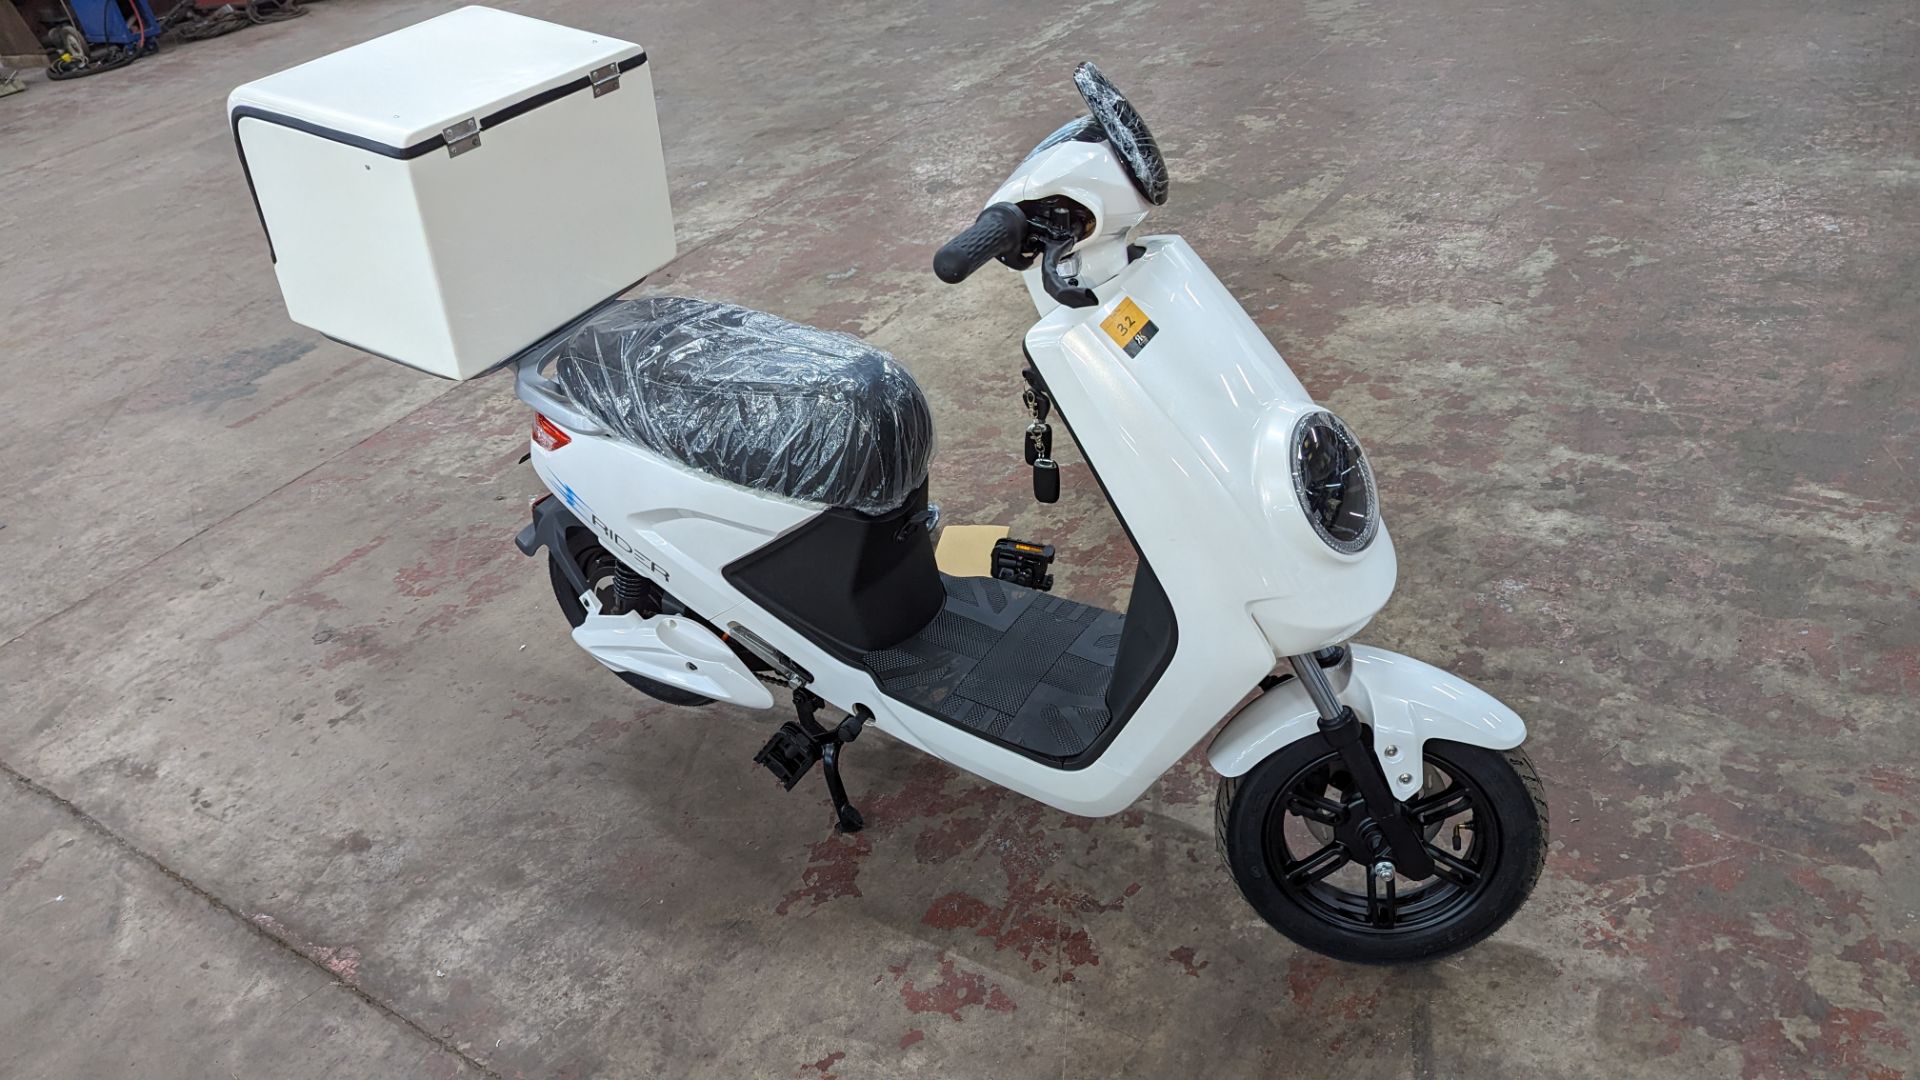 Model 18 Electric Bike: Zero (0) recorded miles, white body with black detailing, insulated box moun - Image 8 of 15